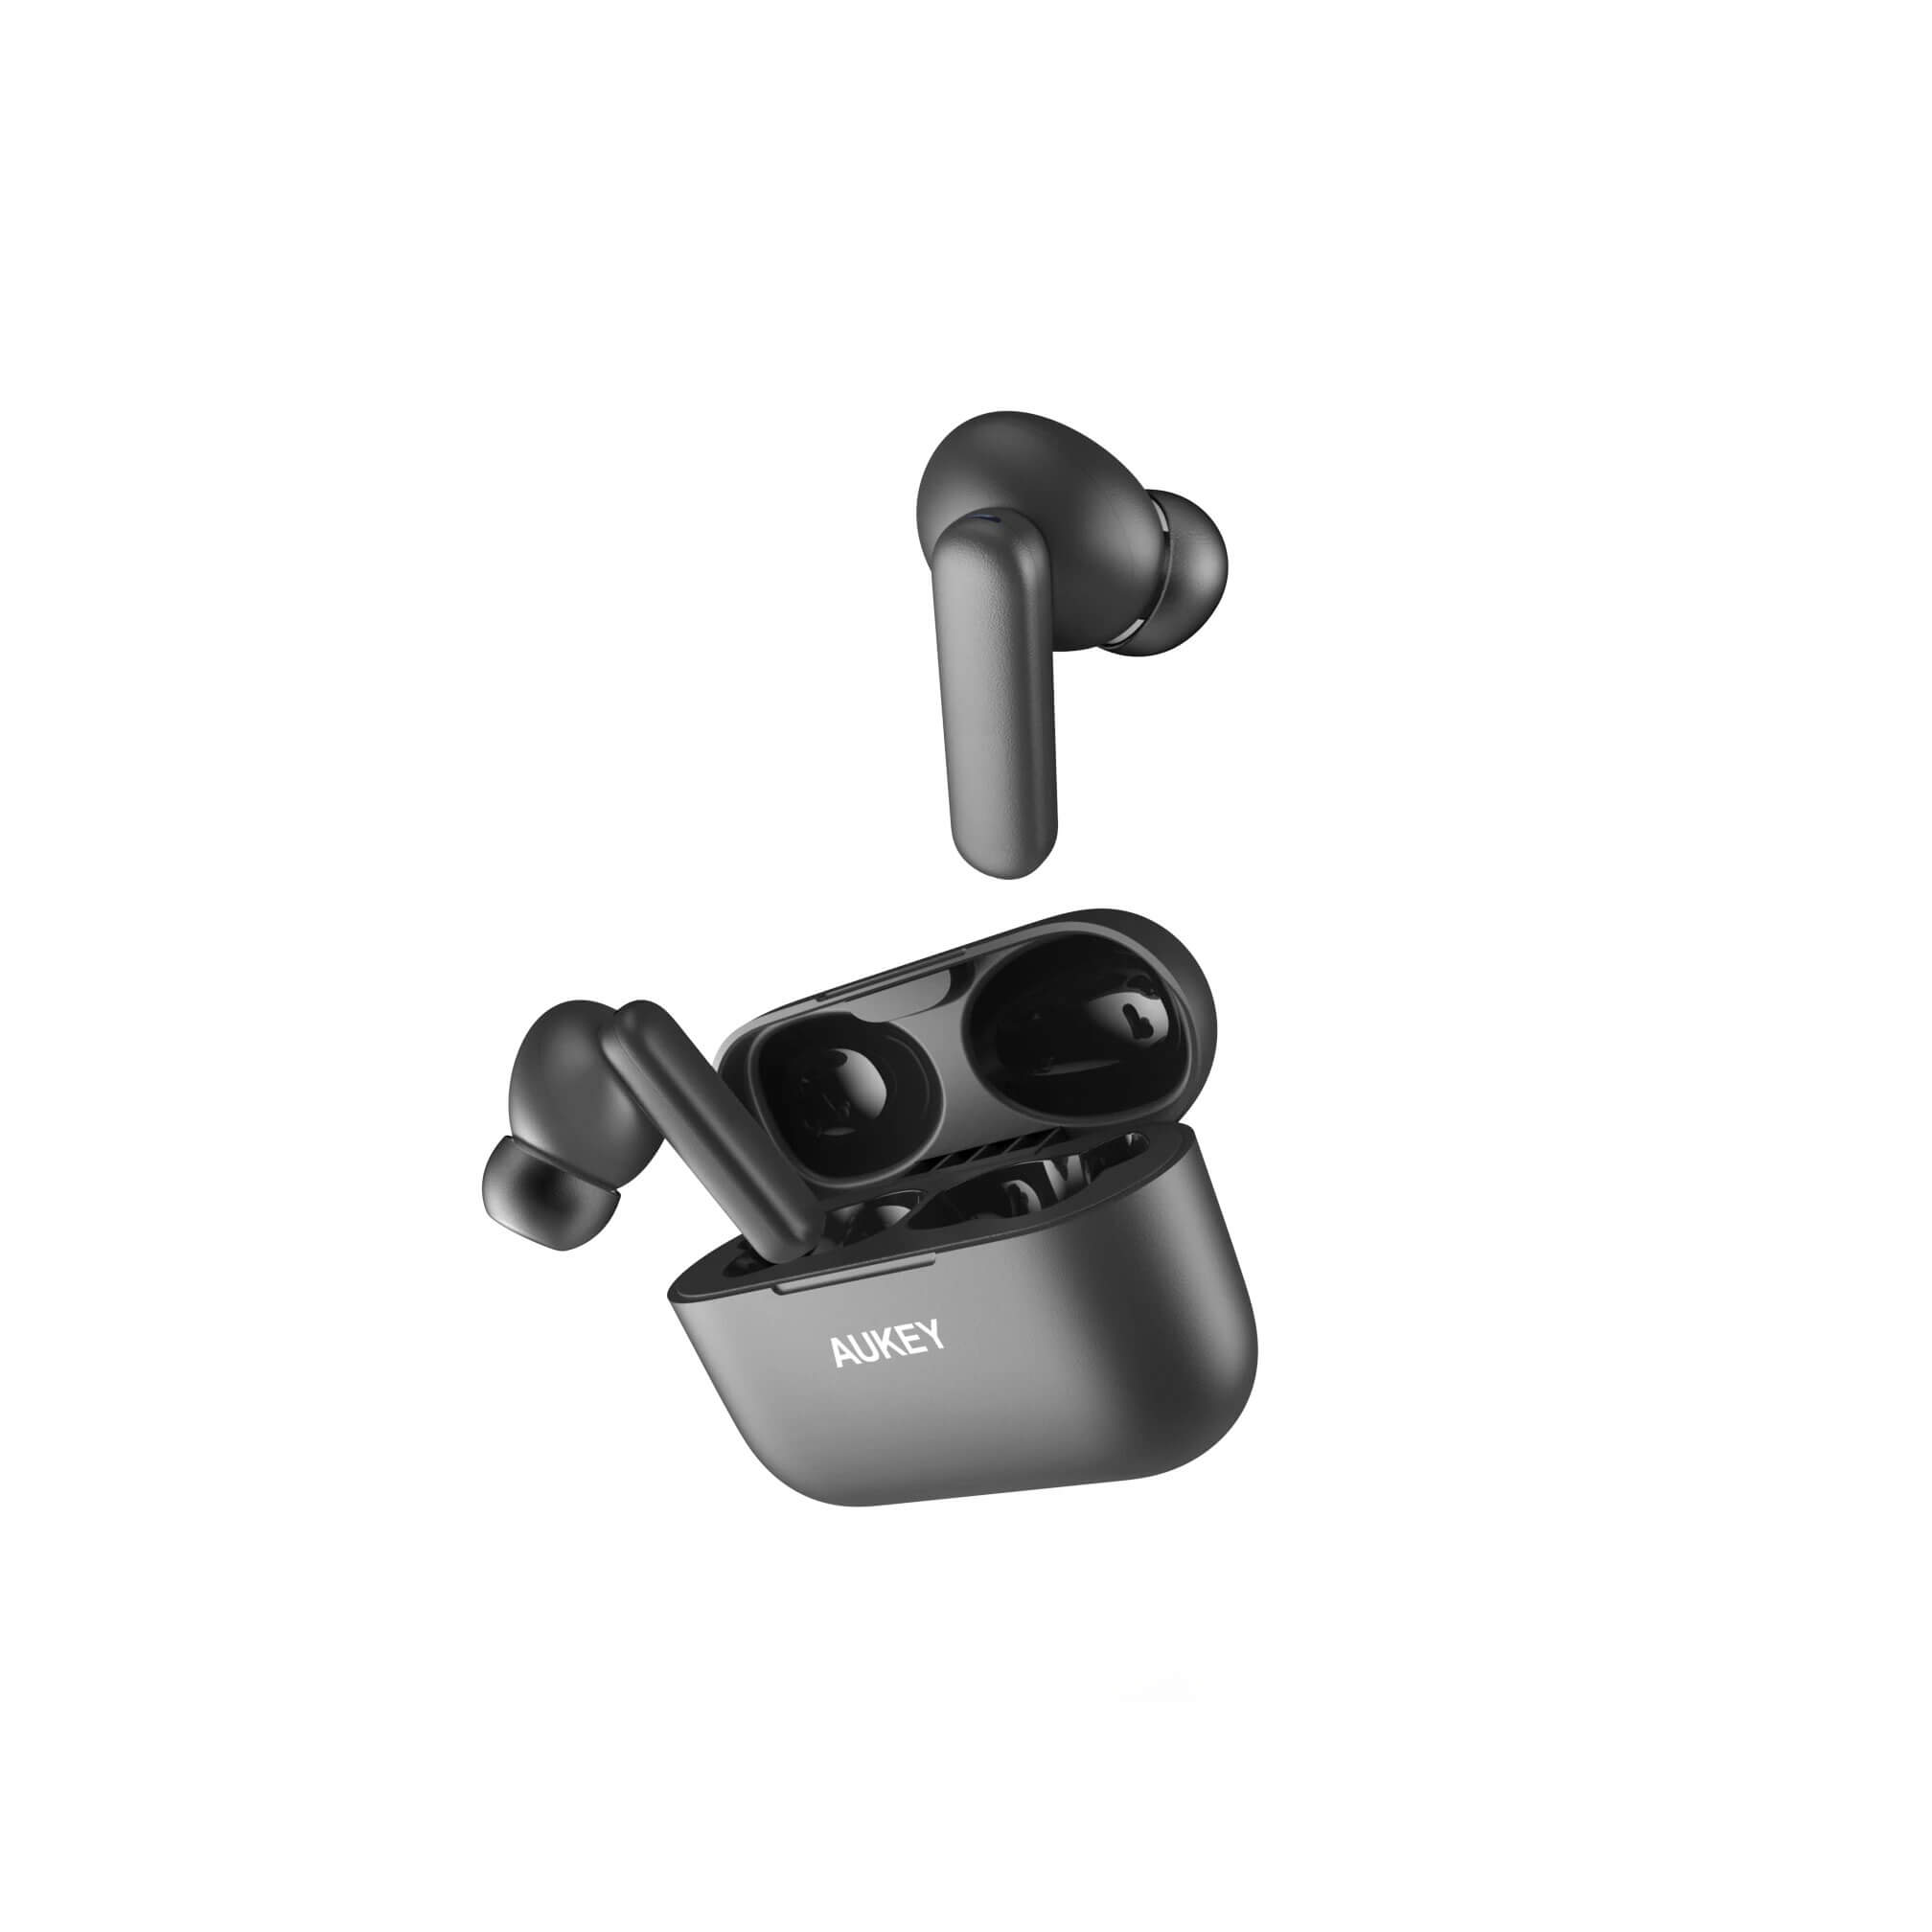 Step-by-Step Guide To Pairing Aukey Wireless Earbuds